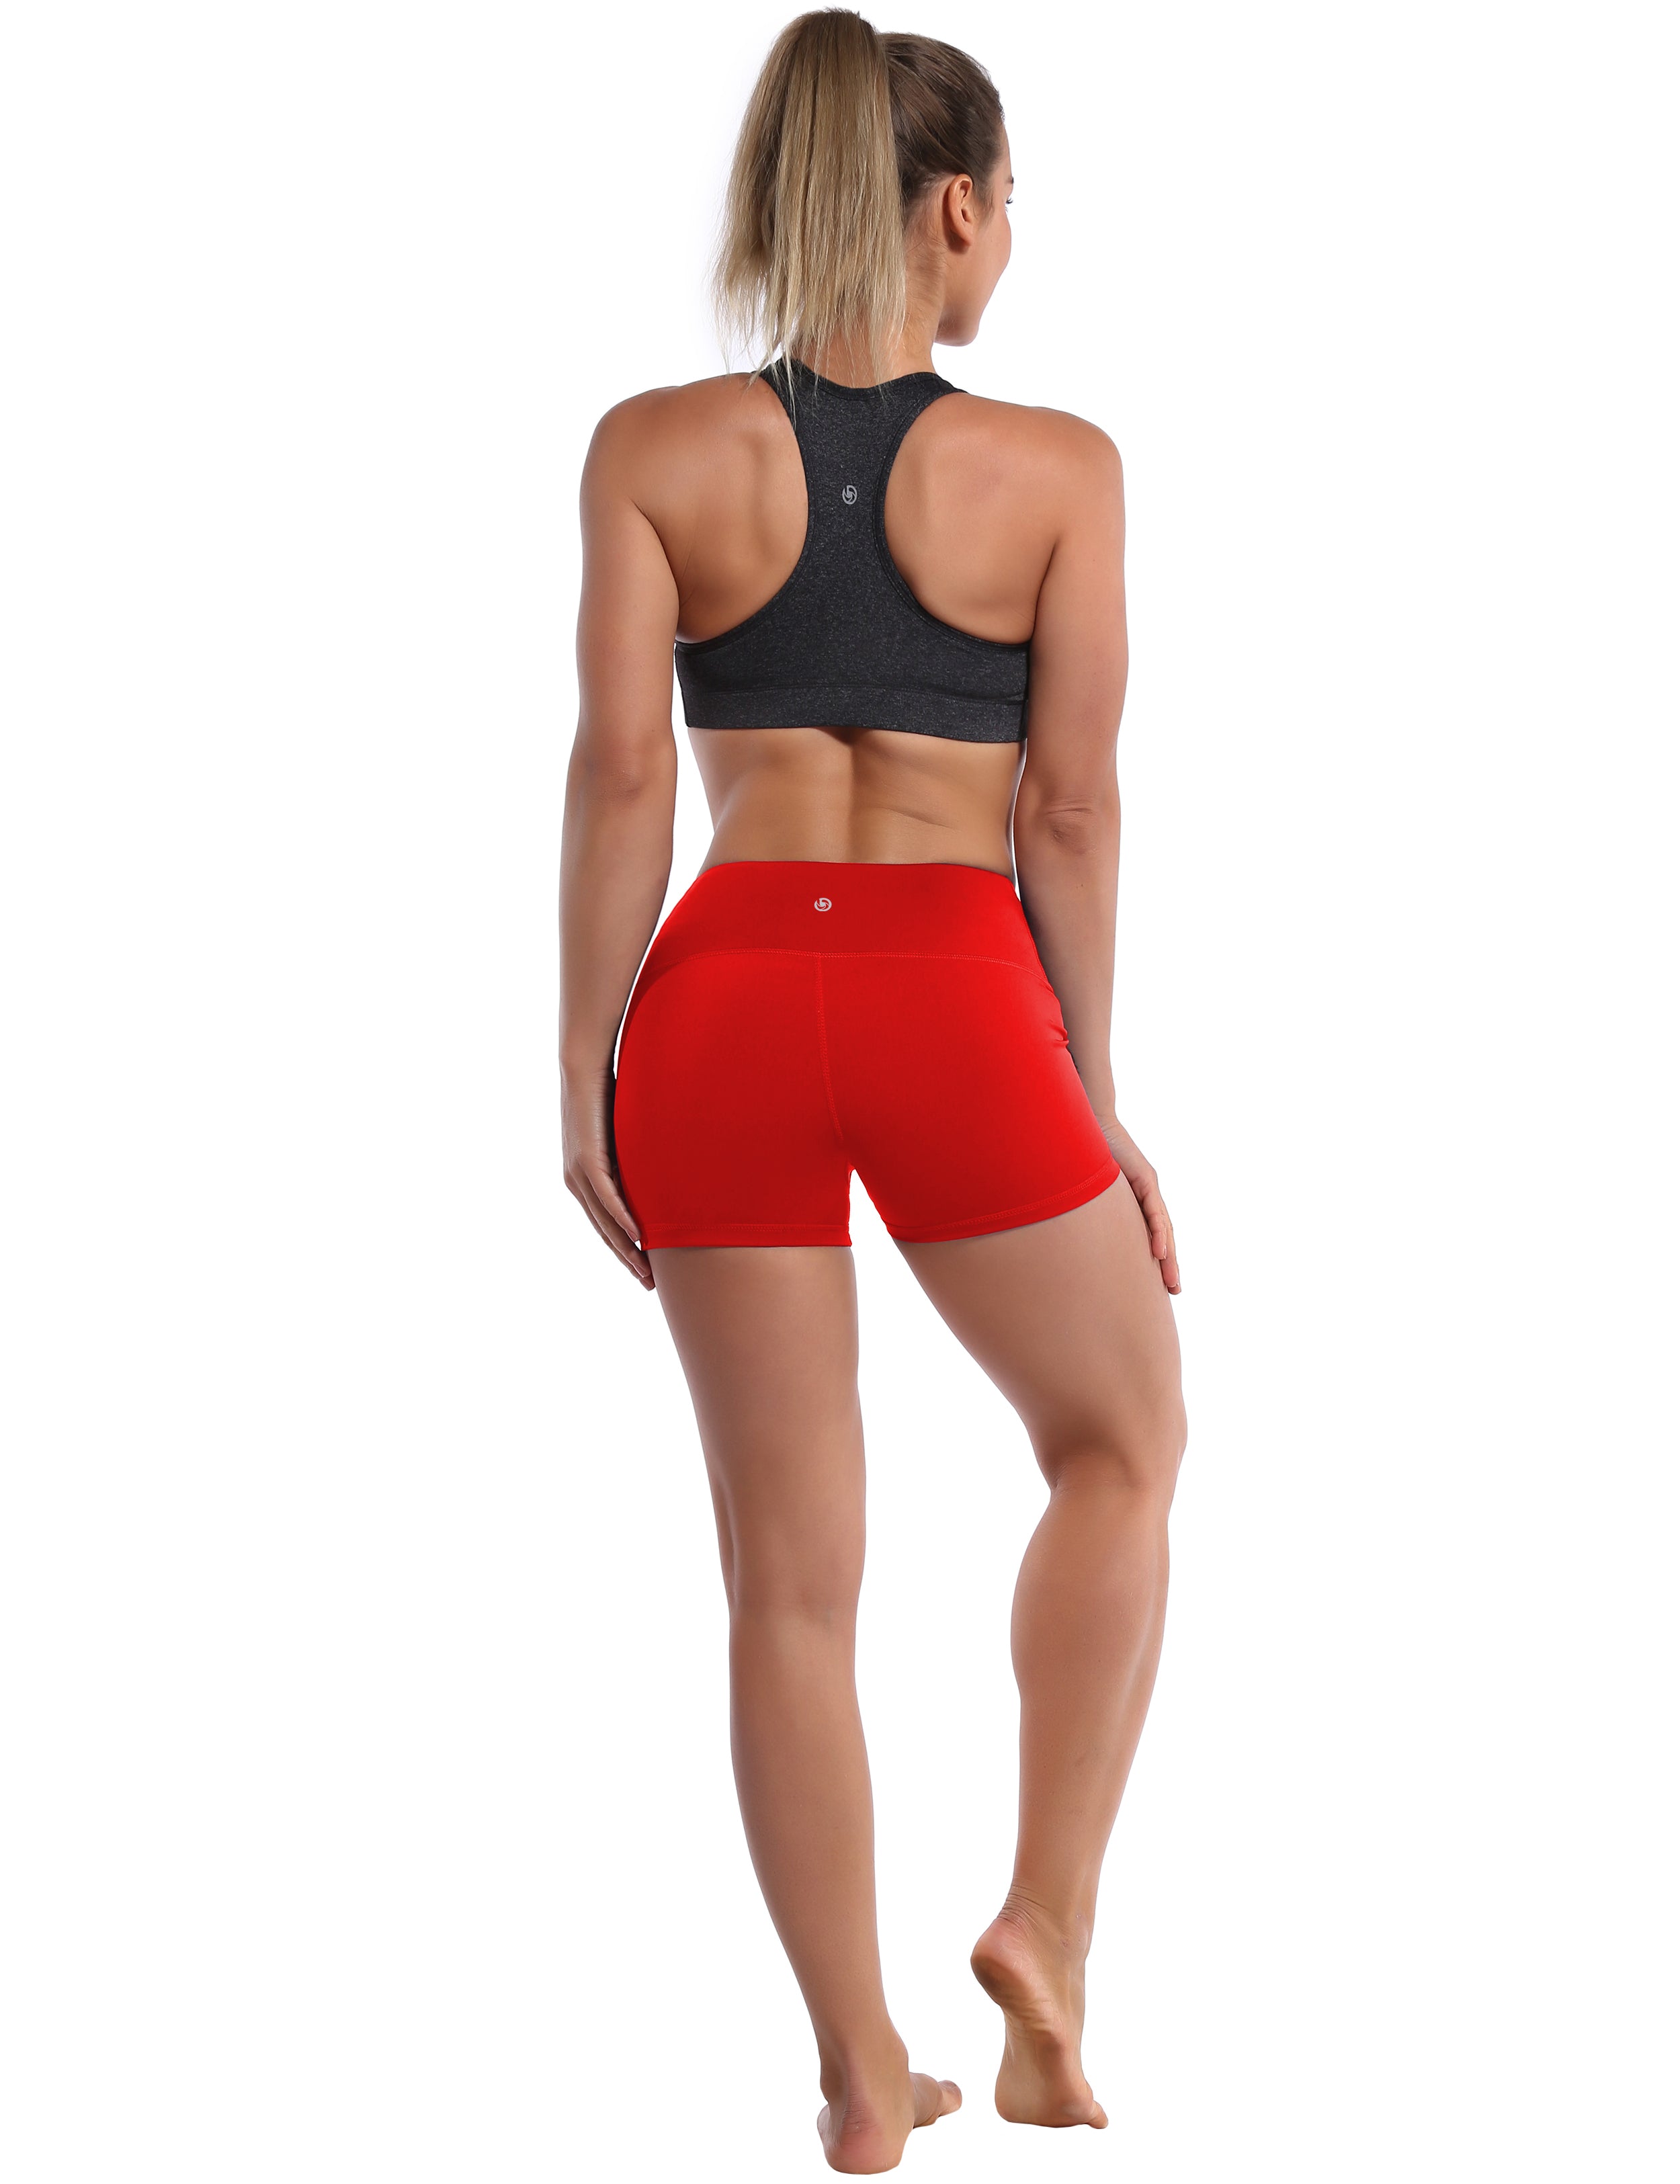 2.5" Golf Shorts scarlet Softest-ever fabric High elasticity High density 4-way stretch Fabric doesn't attract lint easily No see-through Moisture-wicking Machine wash 75% Nylon, 25% Spandex